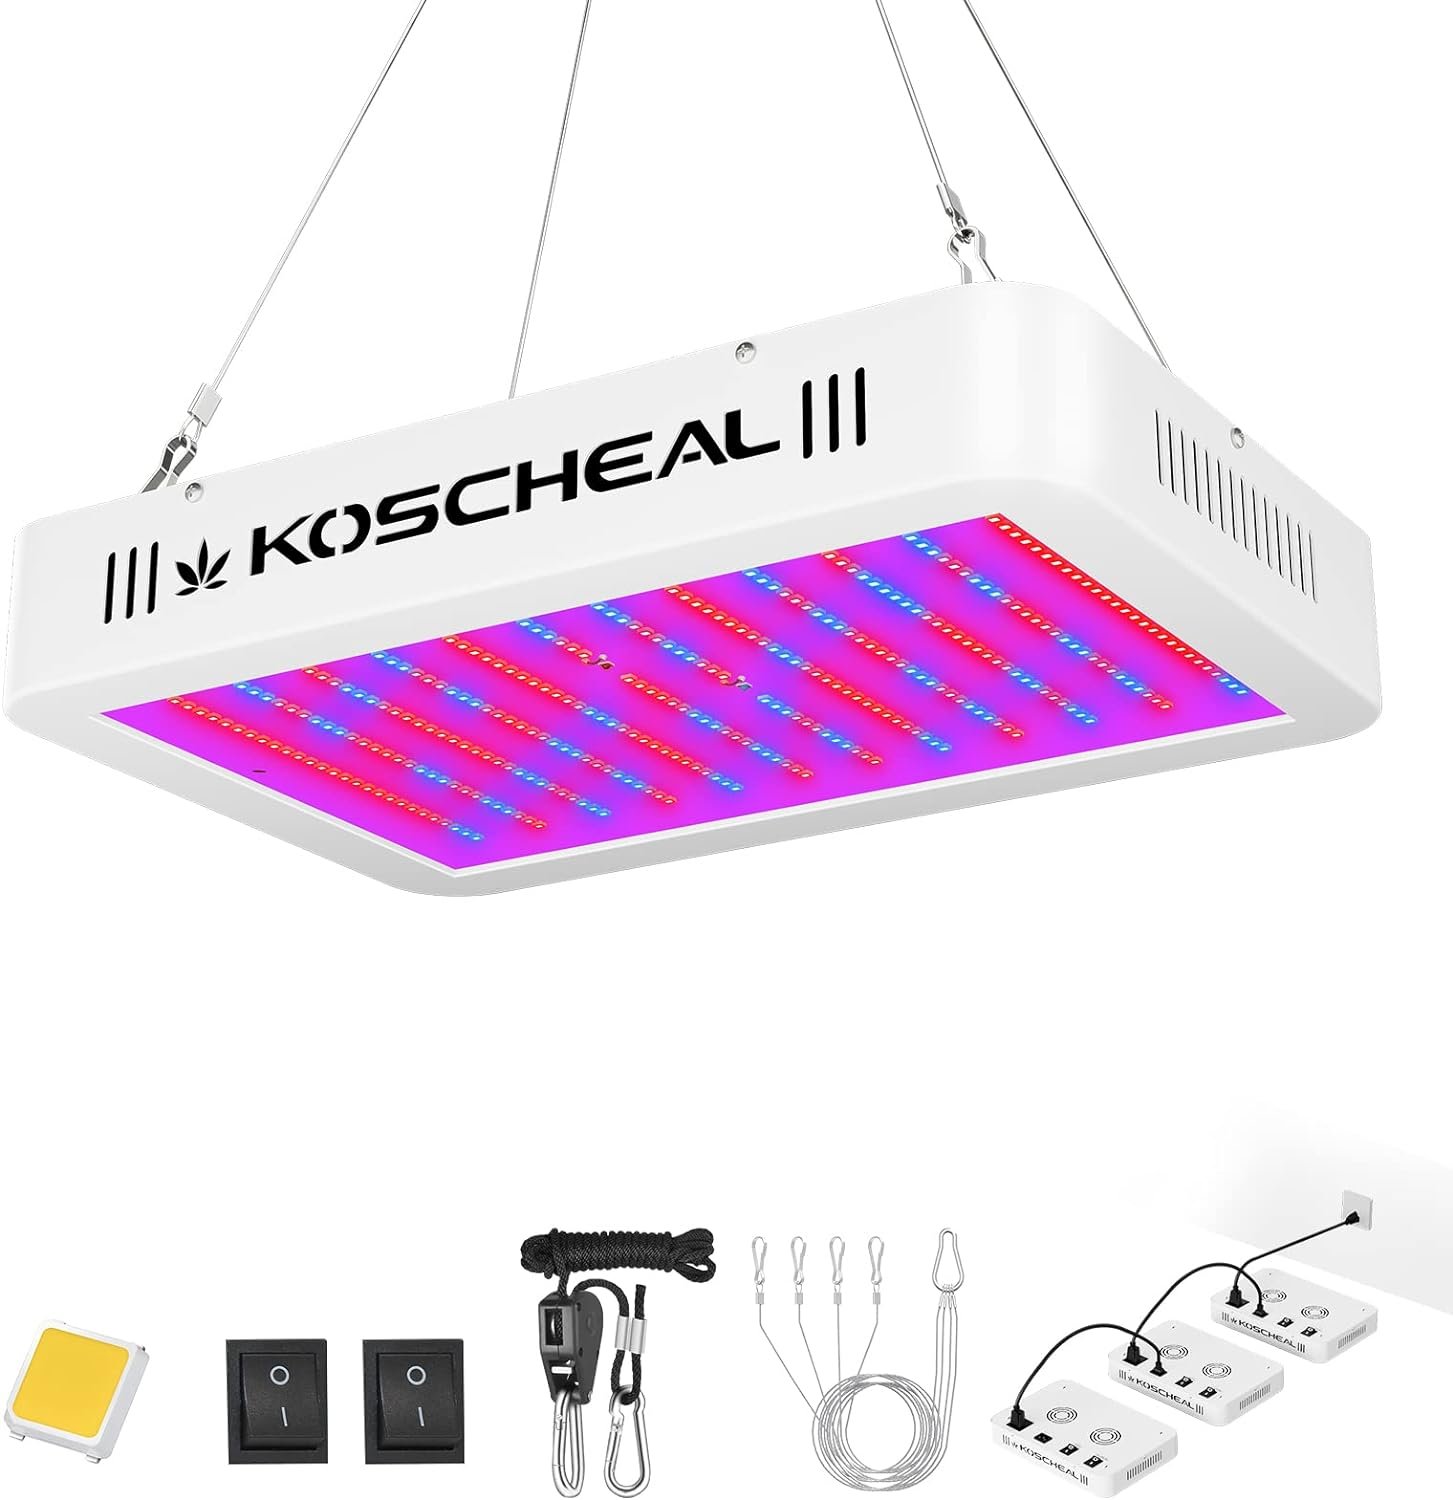 KOSCHEAL LED Grow Light Full Spectrum 1200W, Plant Grow Light with Veg  Bloom Switch for Hydroponic Indoor Plants LED Grow Lamp with Daisy Chain, Output 140W